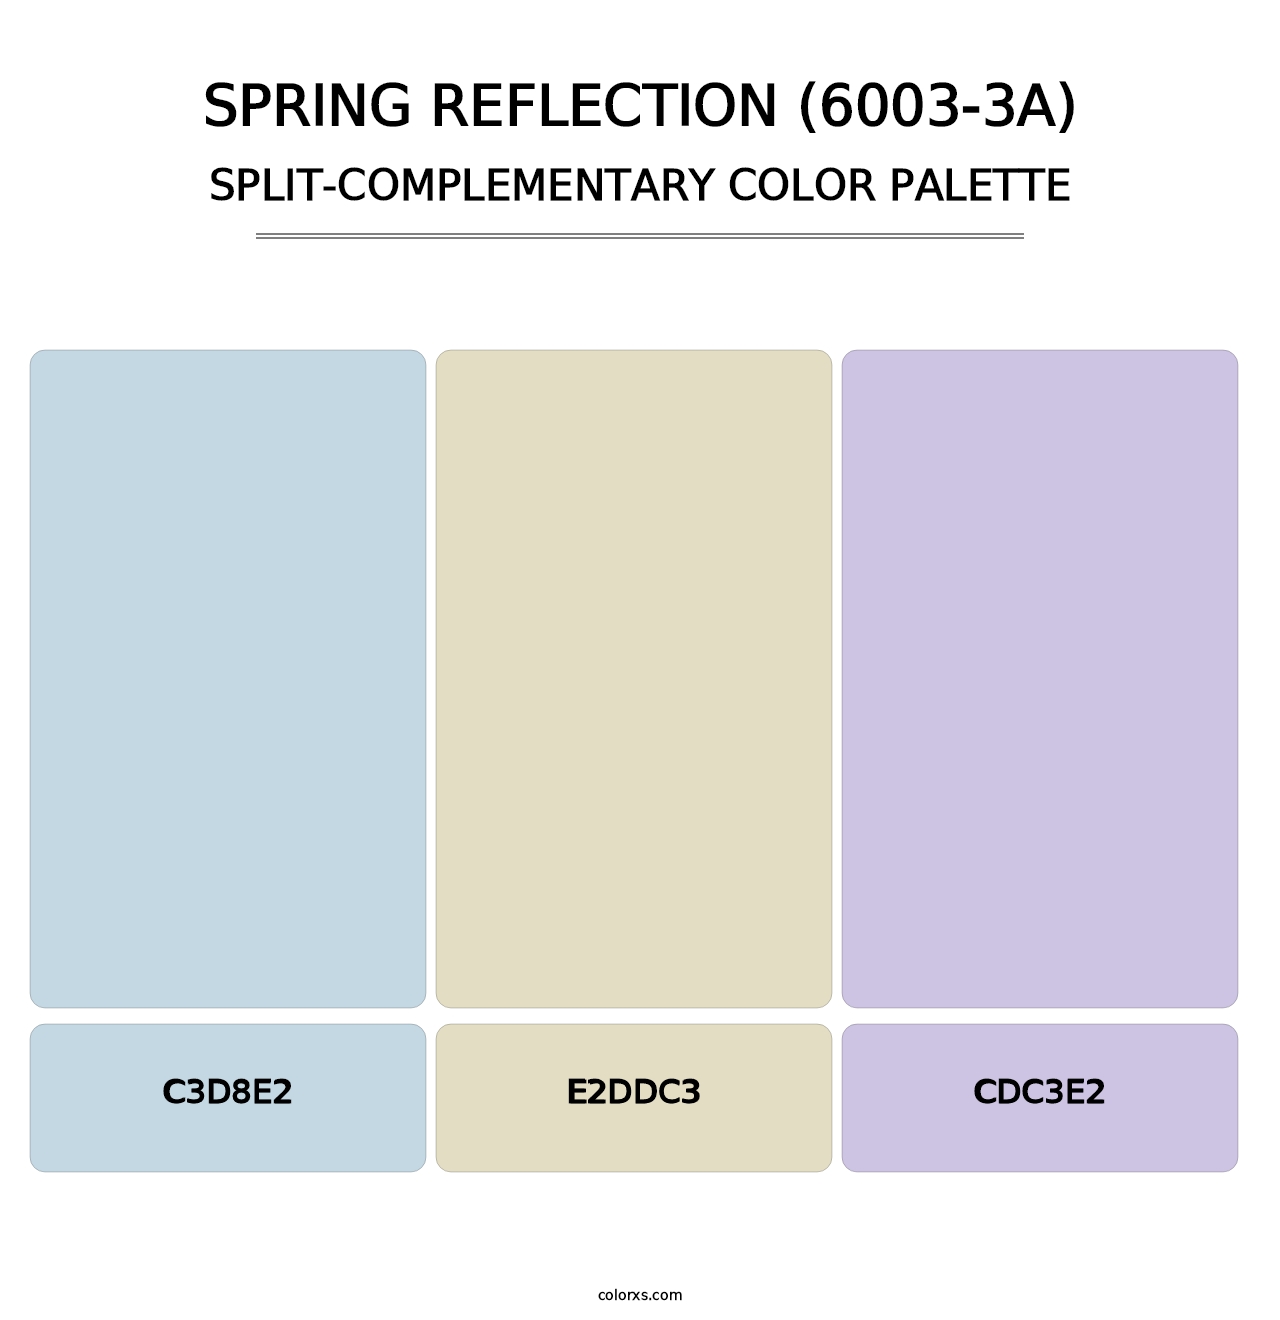 Spring Reflection (6003-3A) - Split-Complementary Color Palette